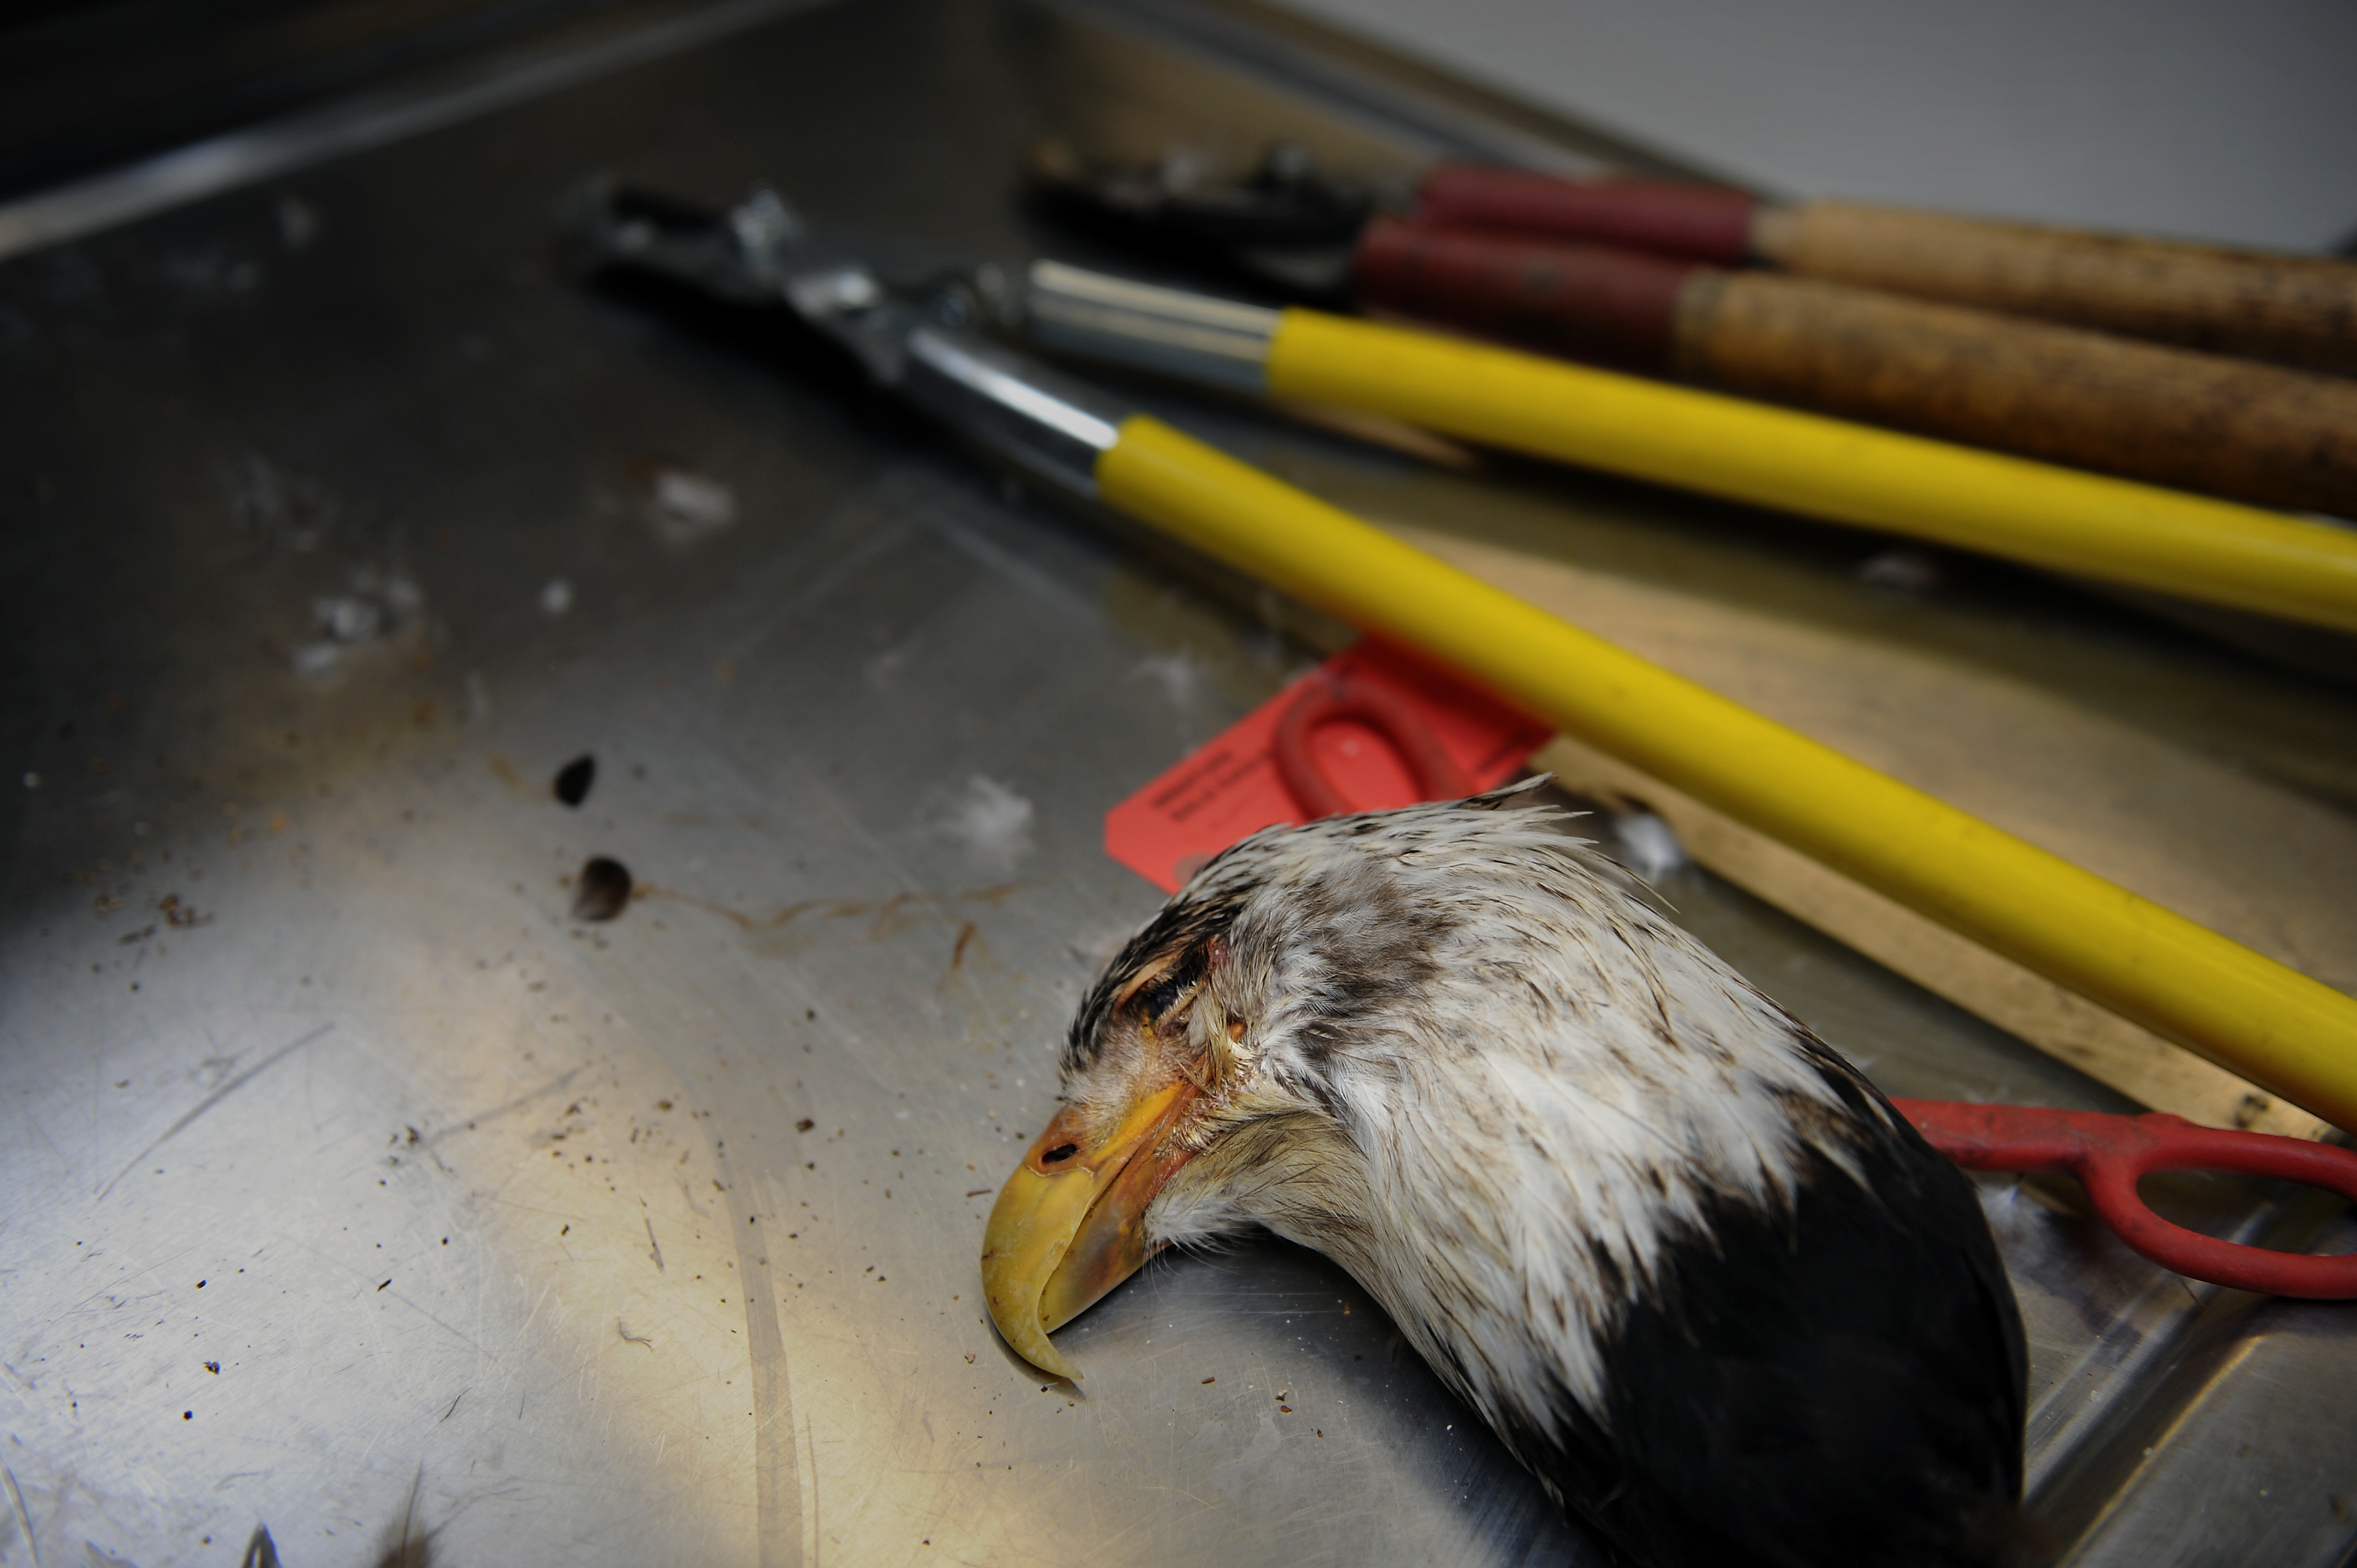 This eagle had been euthanized and the body will not be sent out with an order. All useable parts of the eagle bodies from wherever they fall are kept so Native American religious practitioners have the requisite eagle feathers, talons, etc. for their ceremonies in Colo., Aug. 21, 2009.